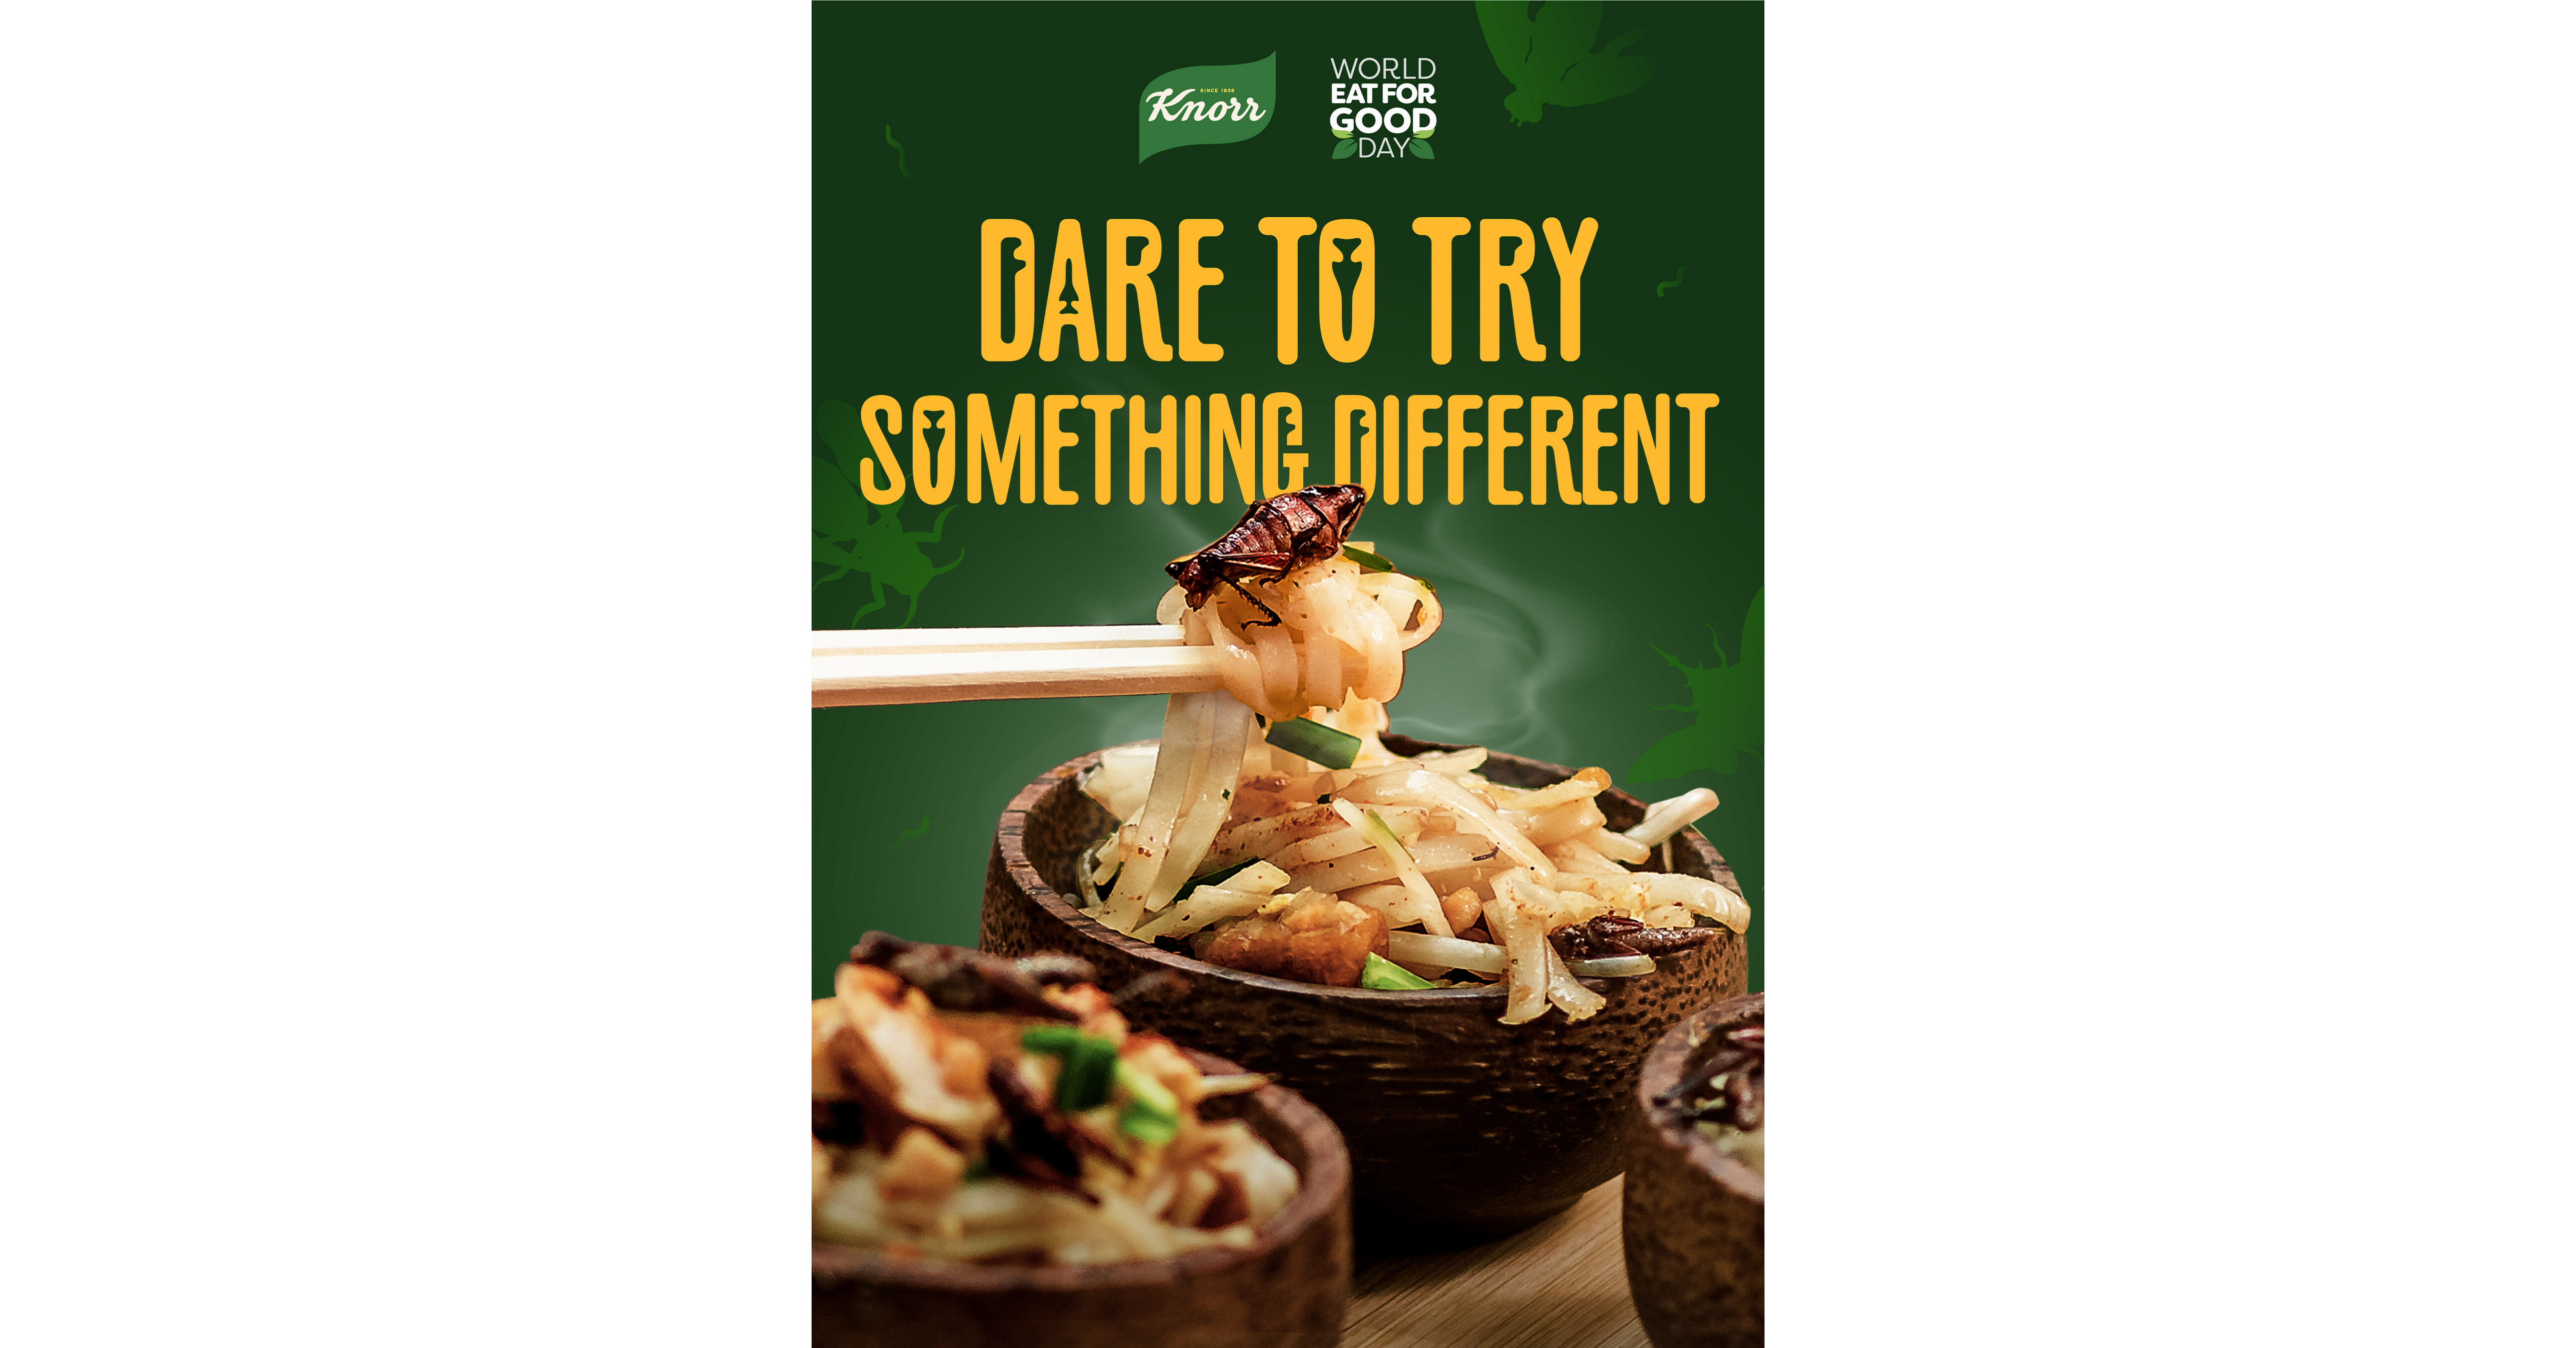 Dare to eat for good with Knorr this ‘World Eat For Good Day’